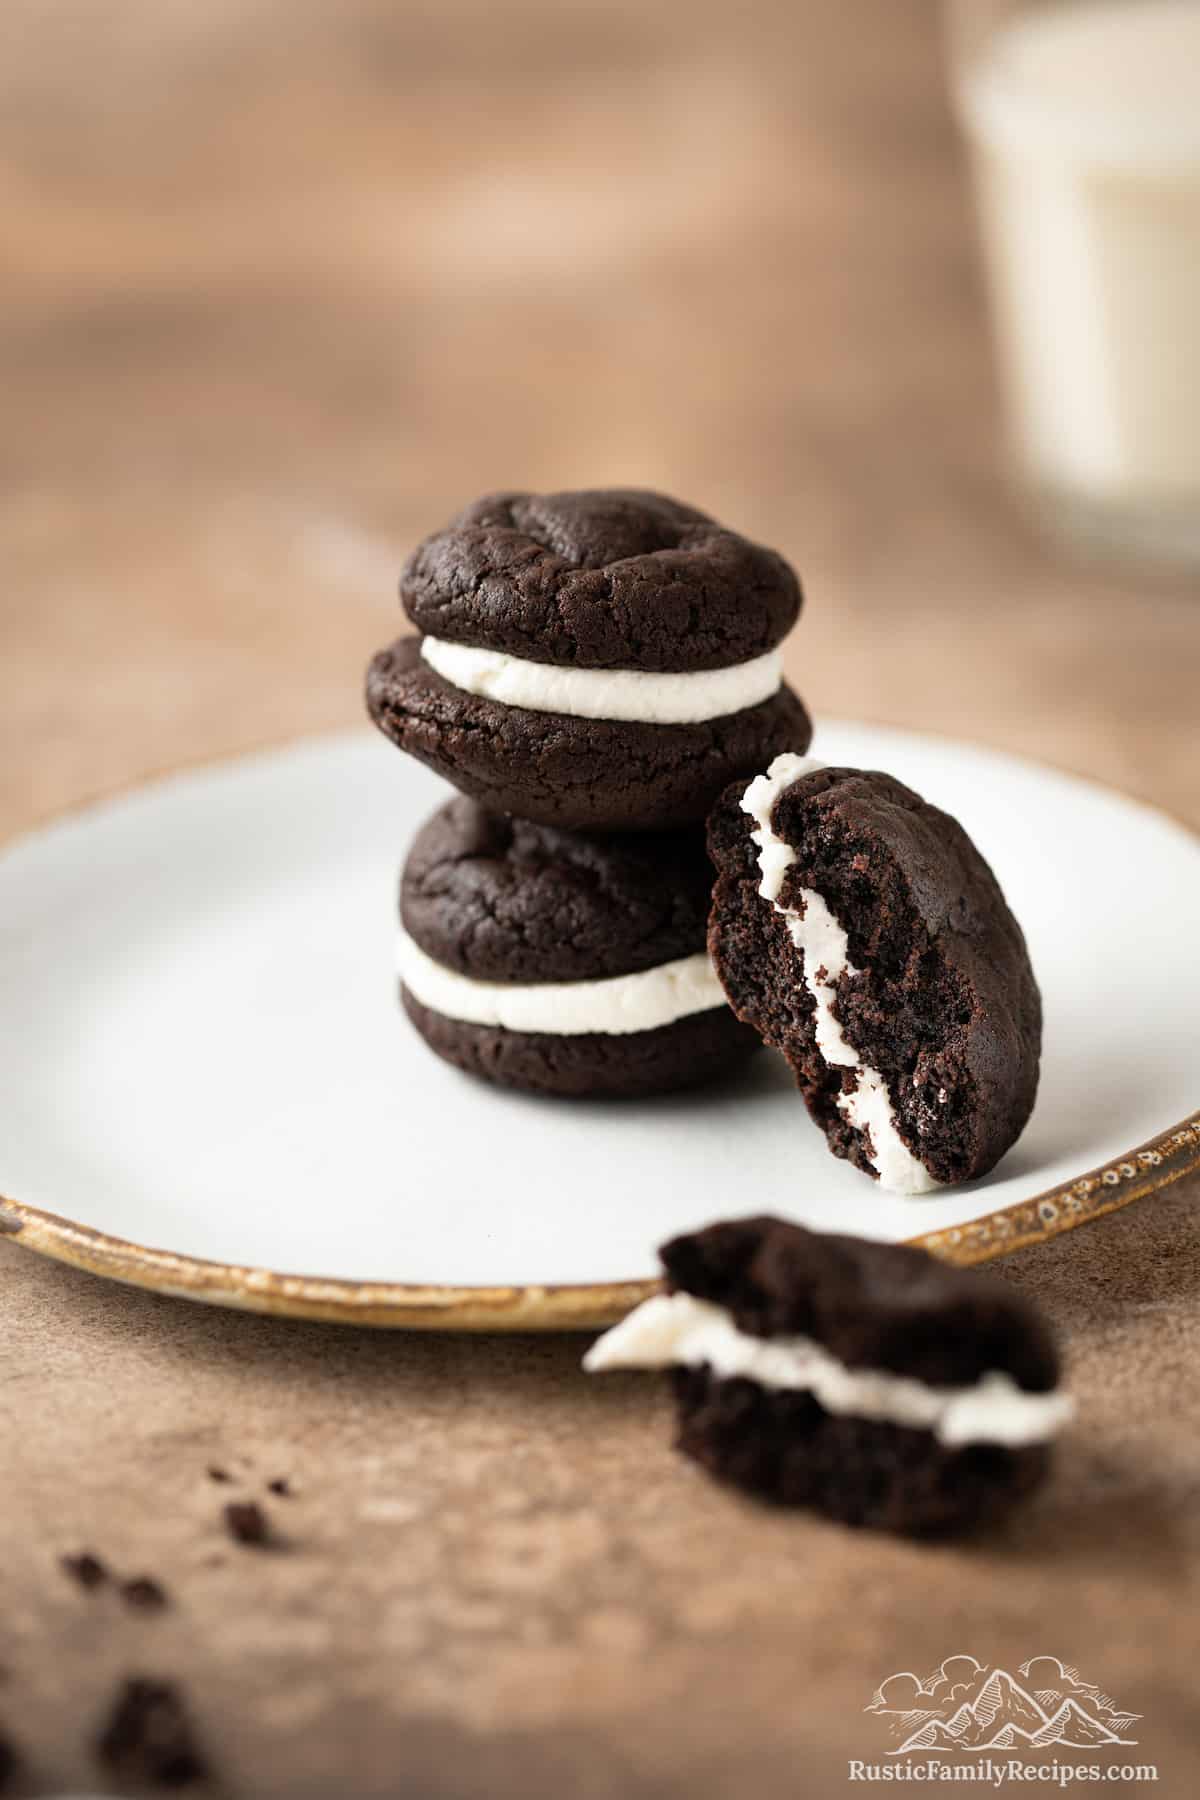 Two Oreo whoopie pies stacked on a white plate, with a third whoopie pie cut in half to reveal the chocolate cookie and vanilla filling layers.